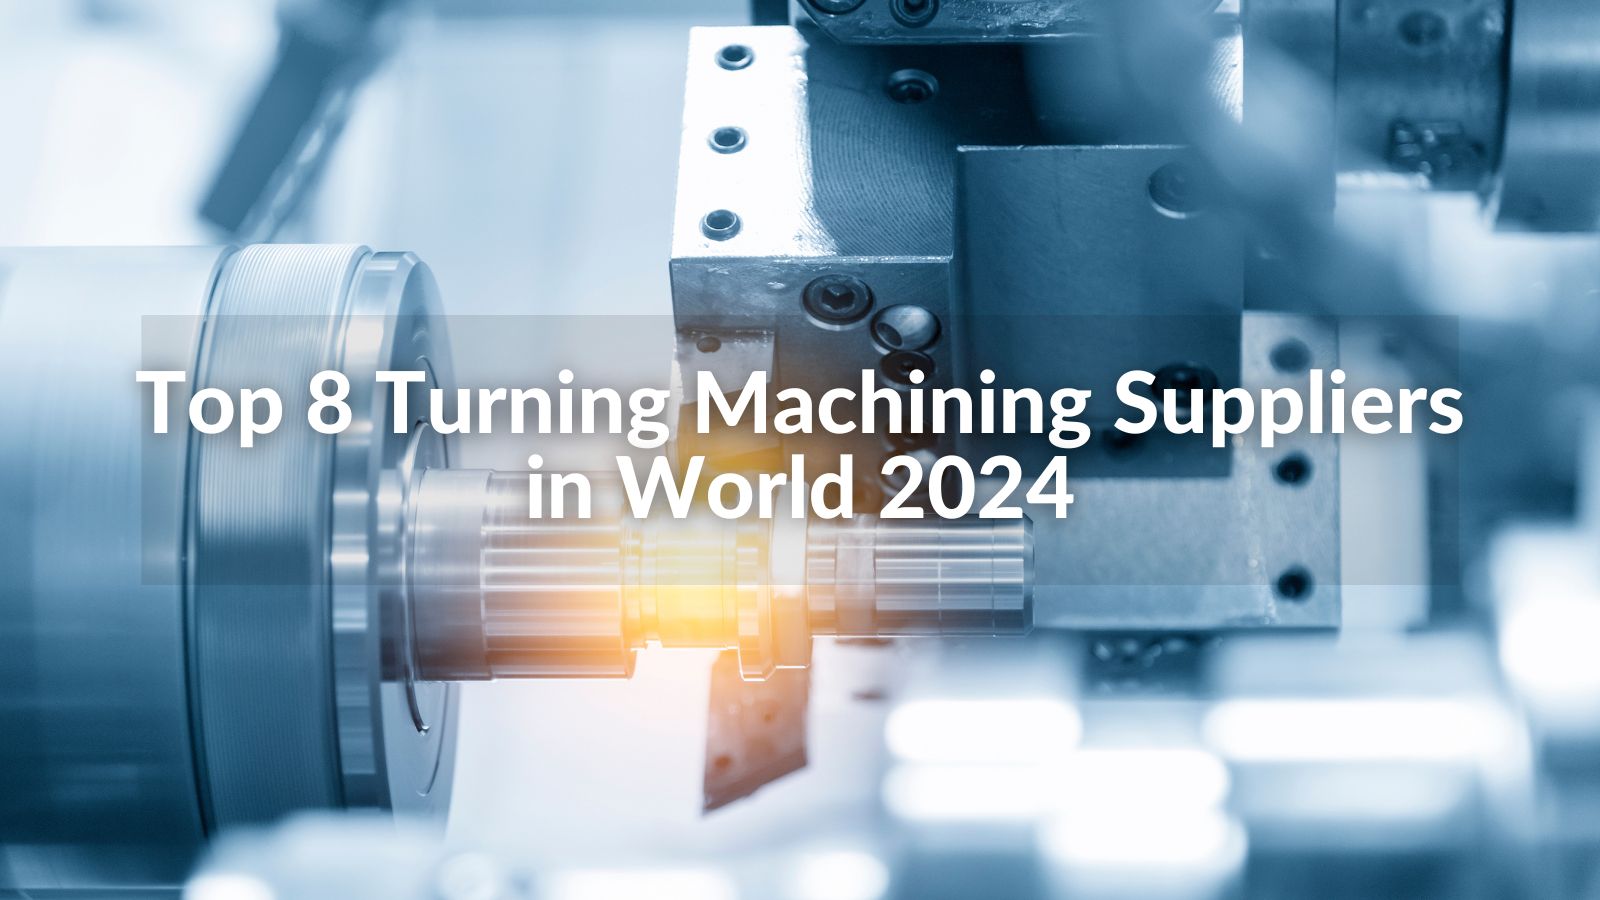 Top 8 Turning Machining Suppliers in World 2024